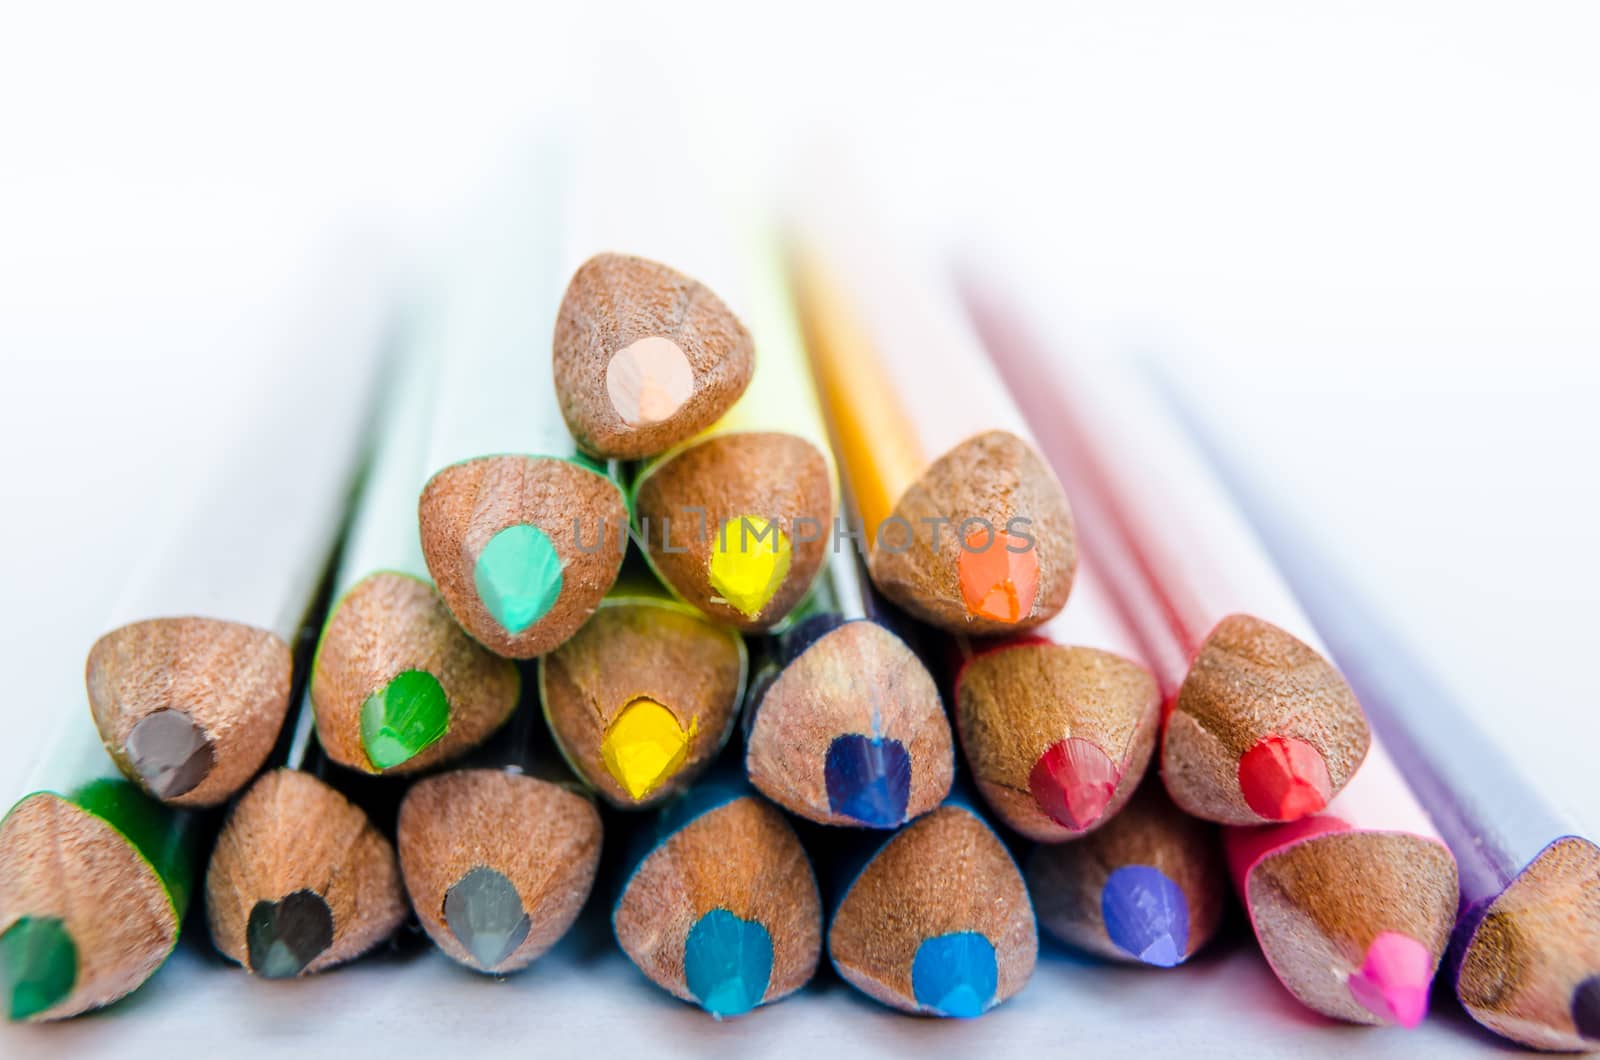 Close up detail of colorful pencils in a small stack on white background